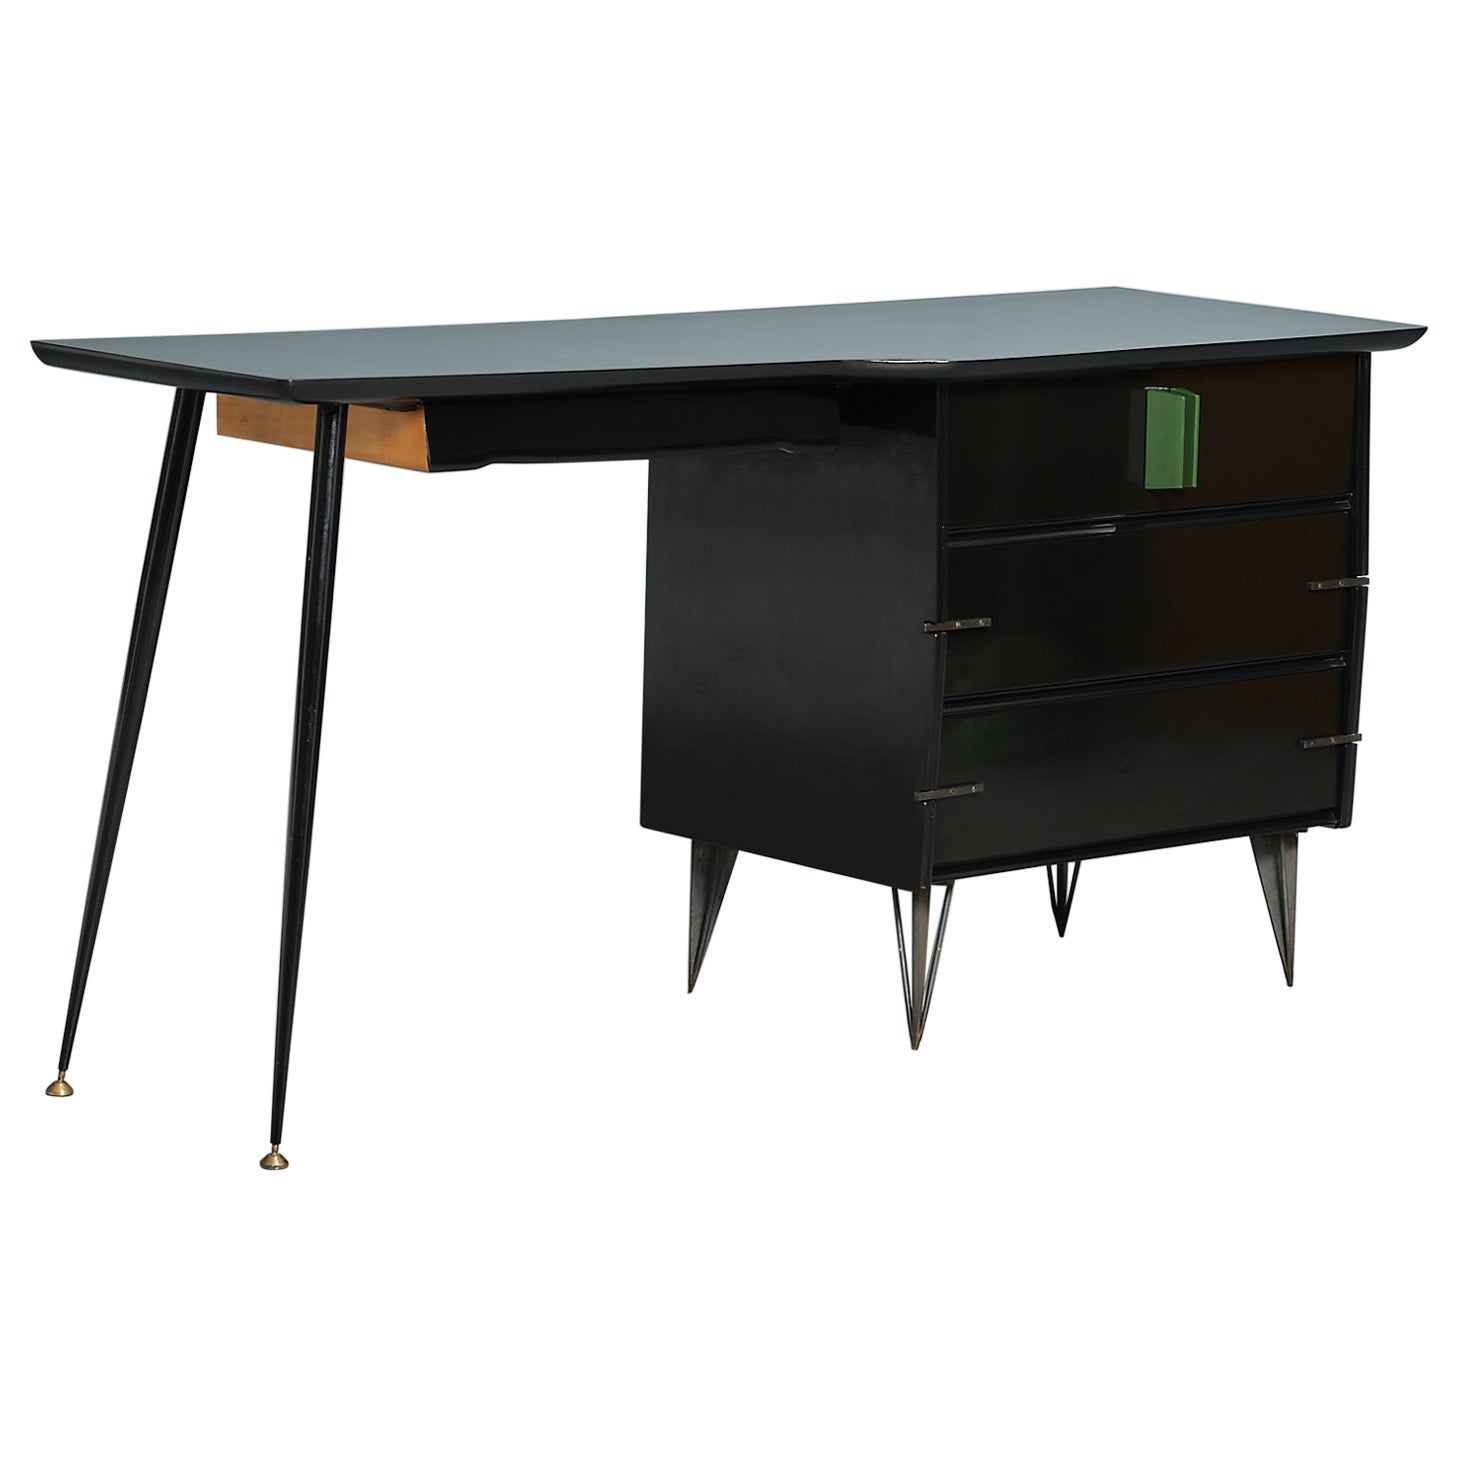 Exquisite Restyled Vintage 1950s Desk by RETRO4M For Sale